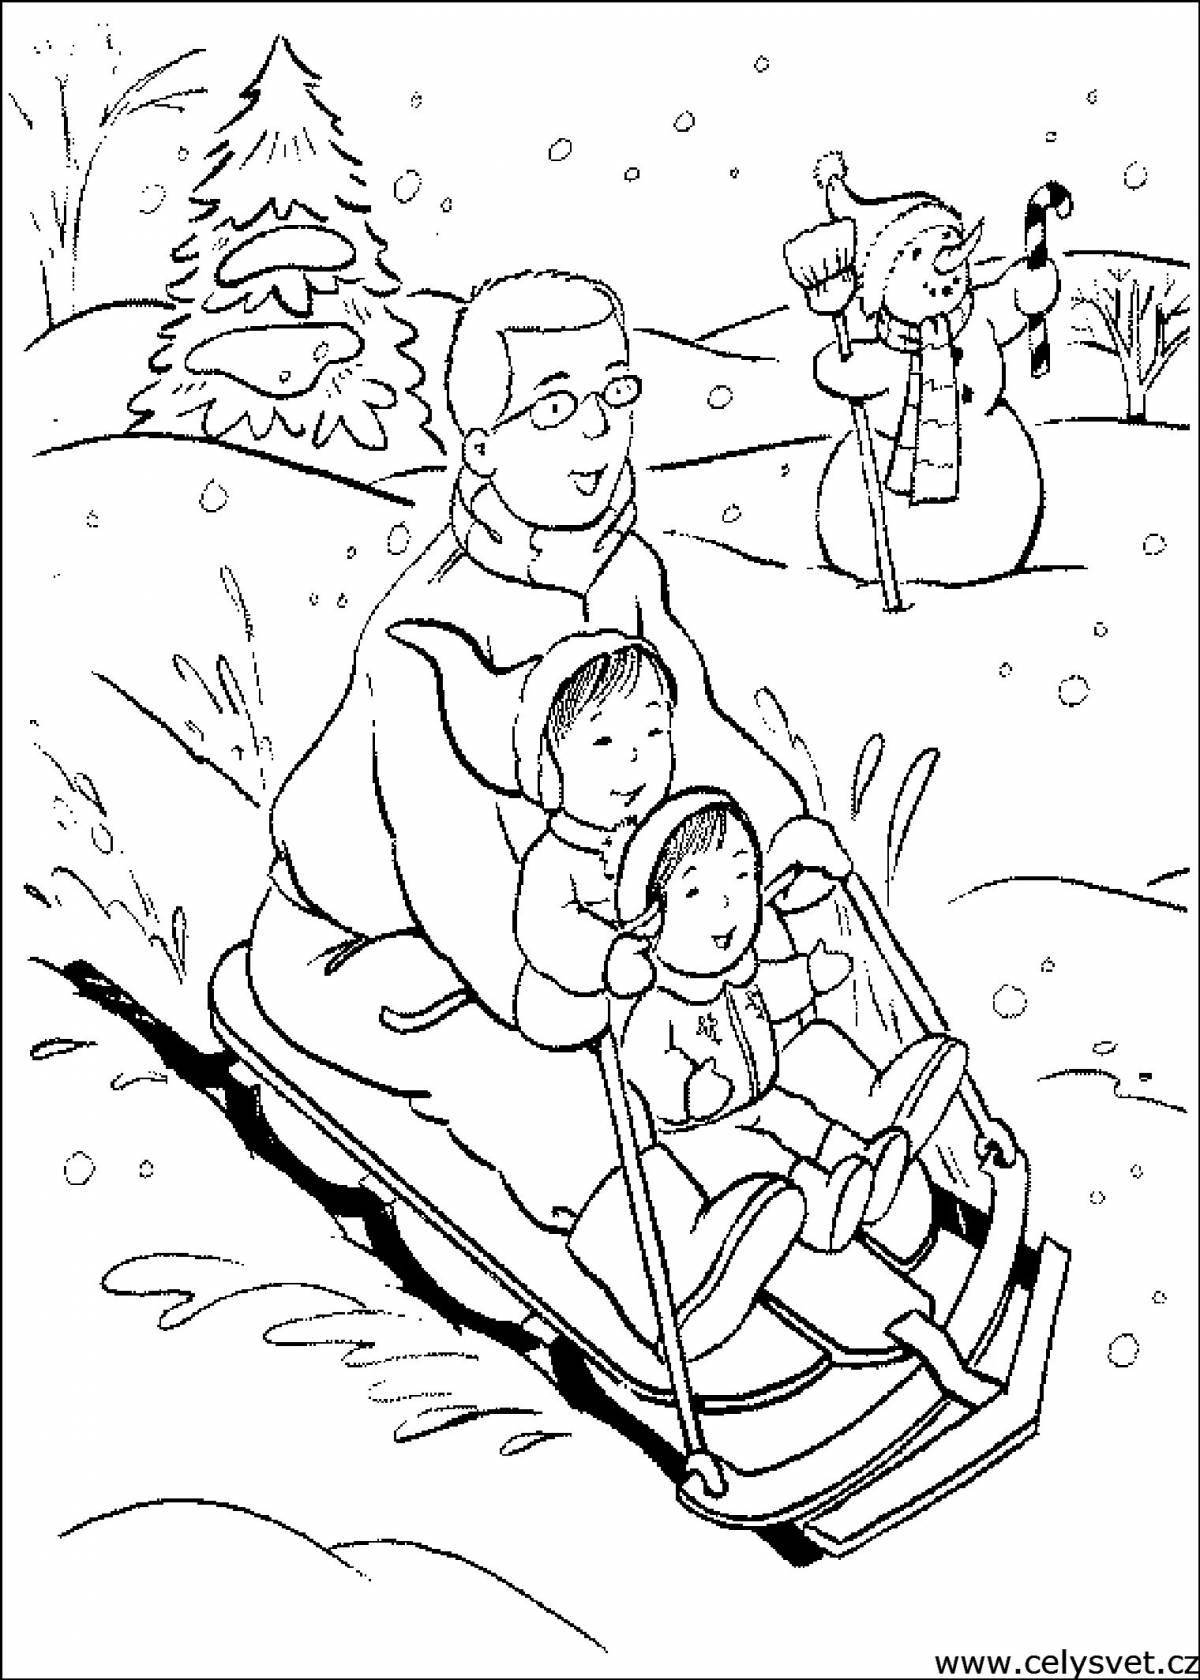 Exciting Christmas family coloring book